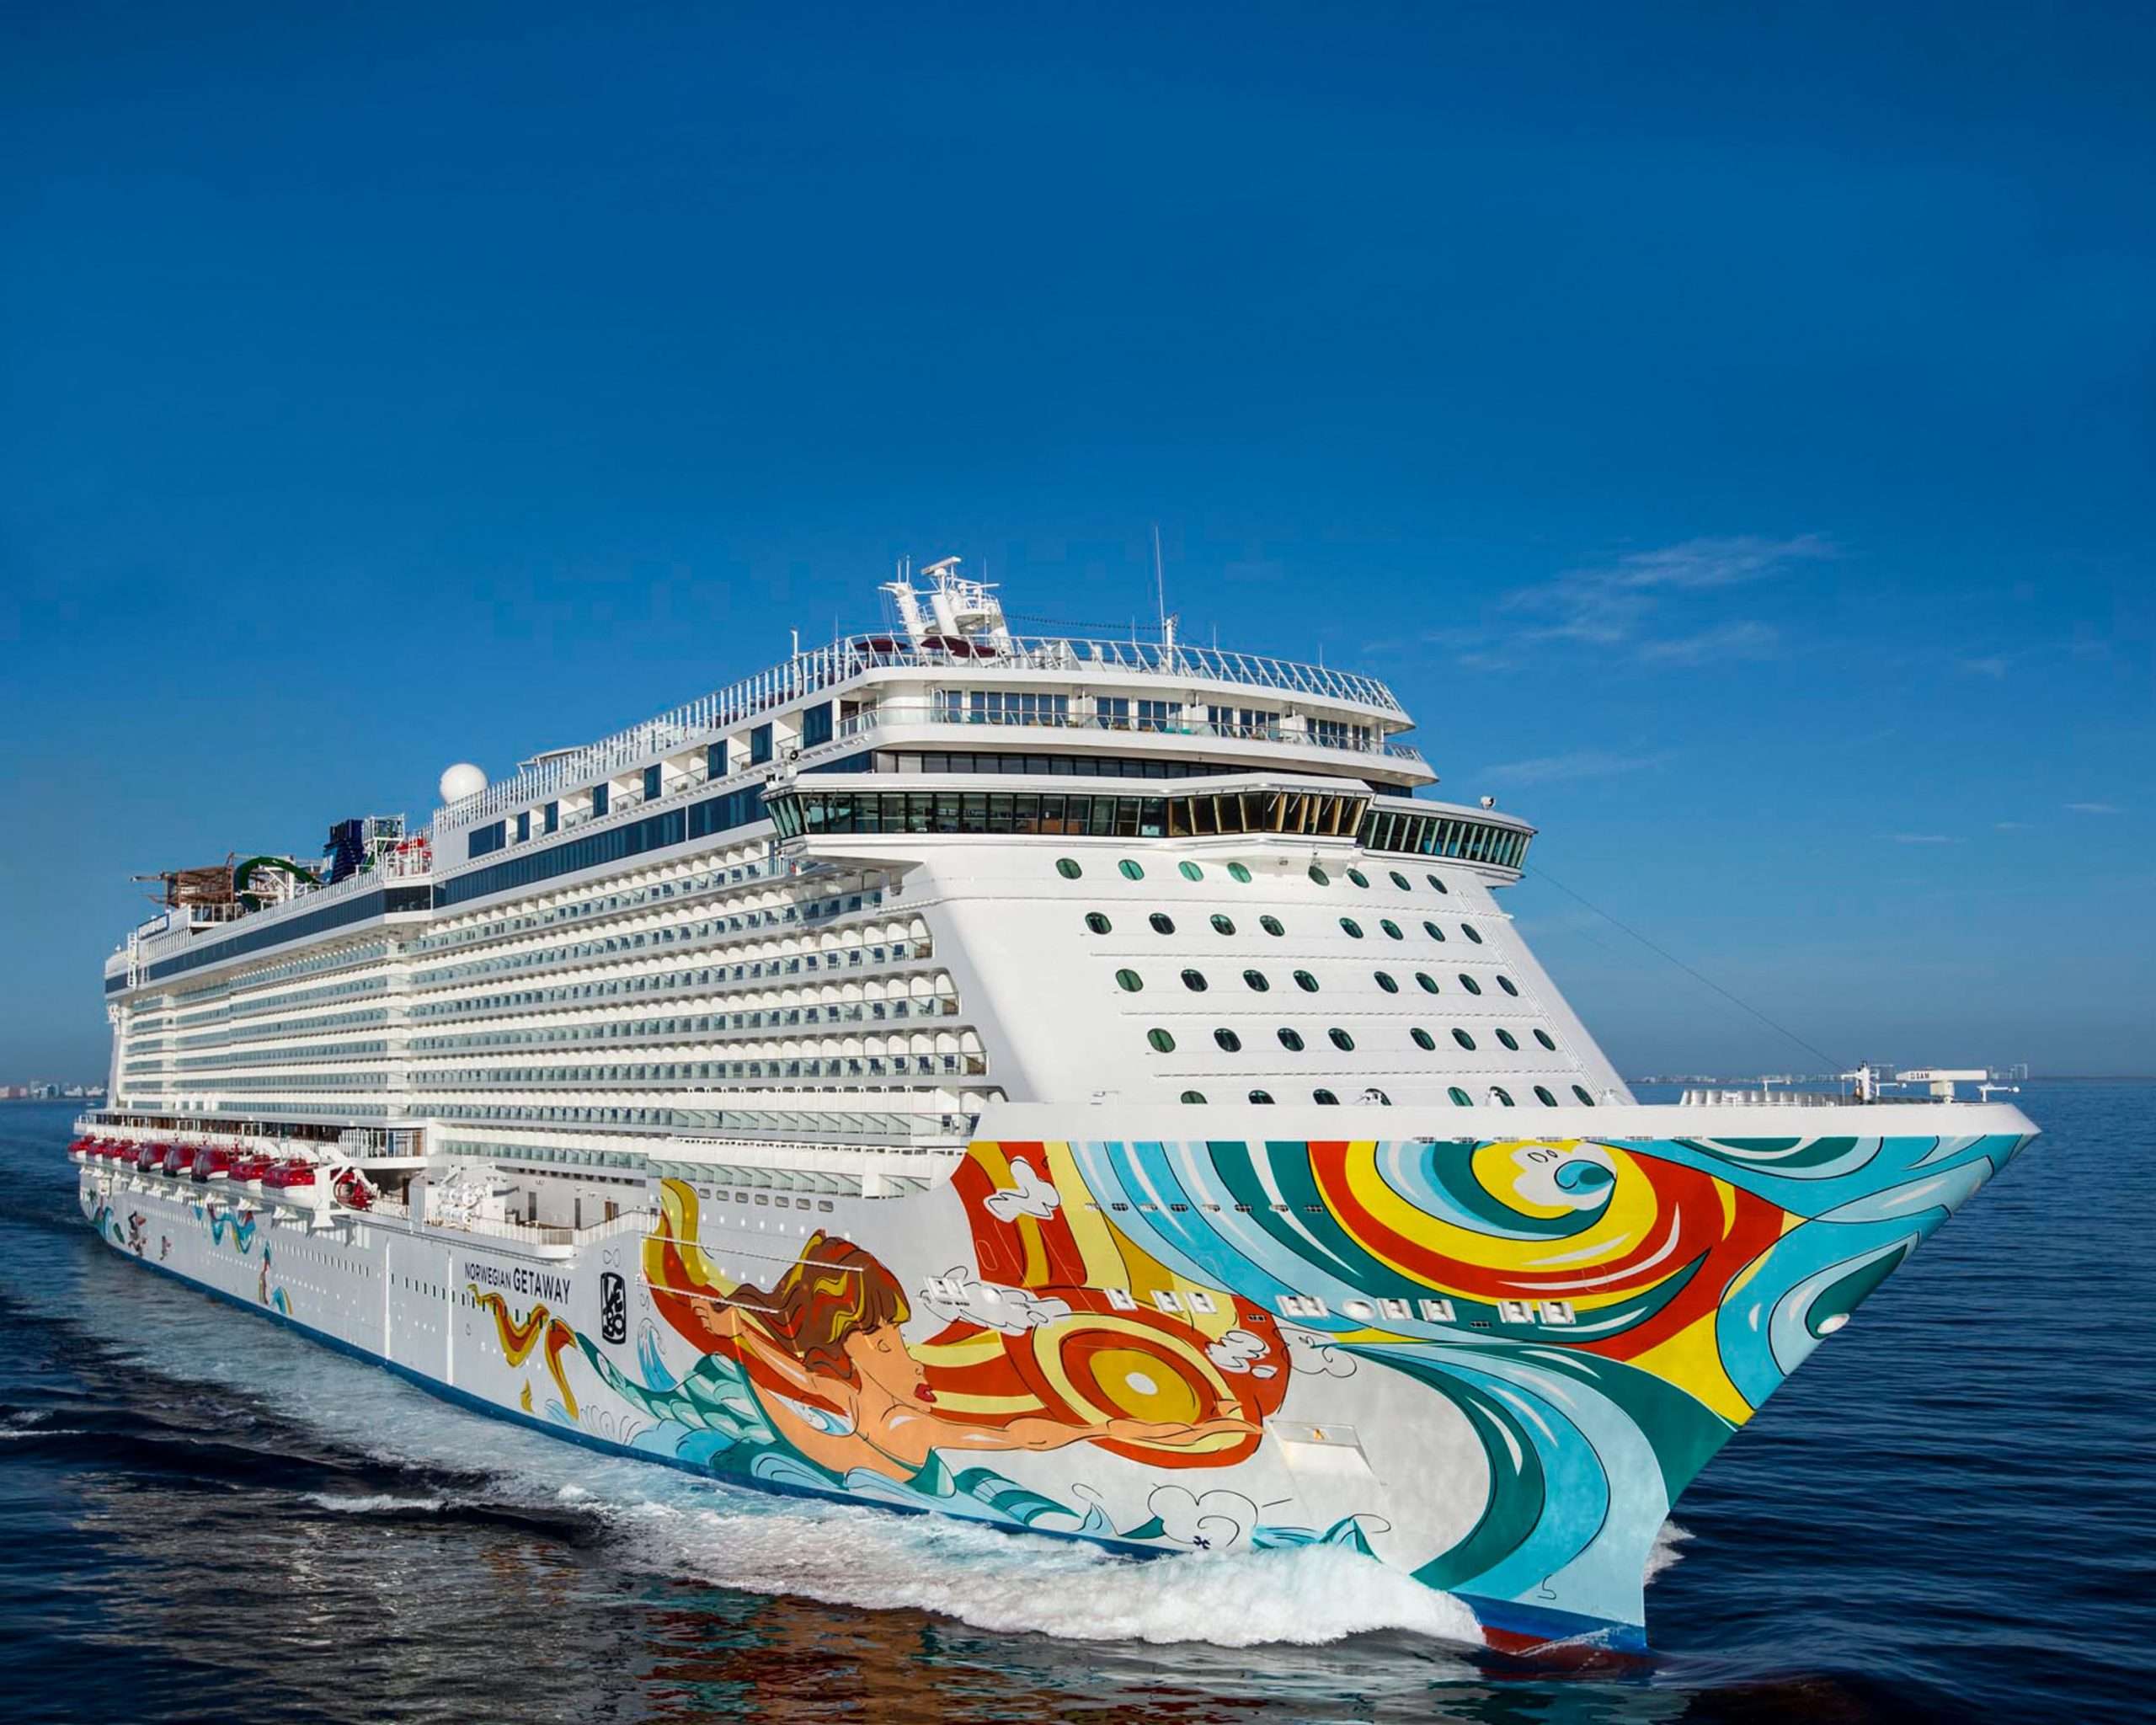 Check out the Norwegian Getaway ship and all the fun ...